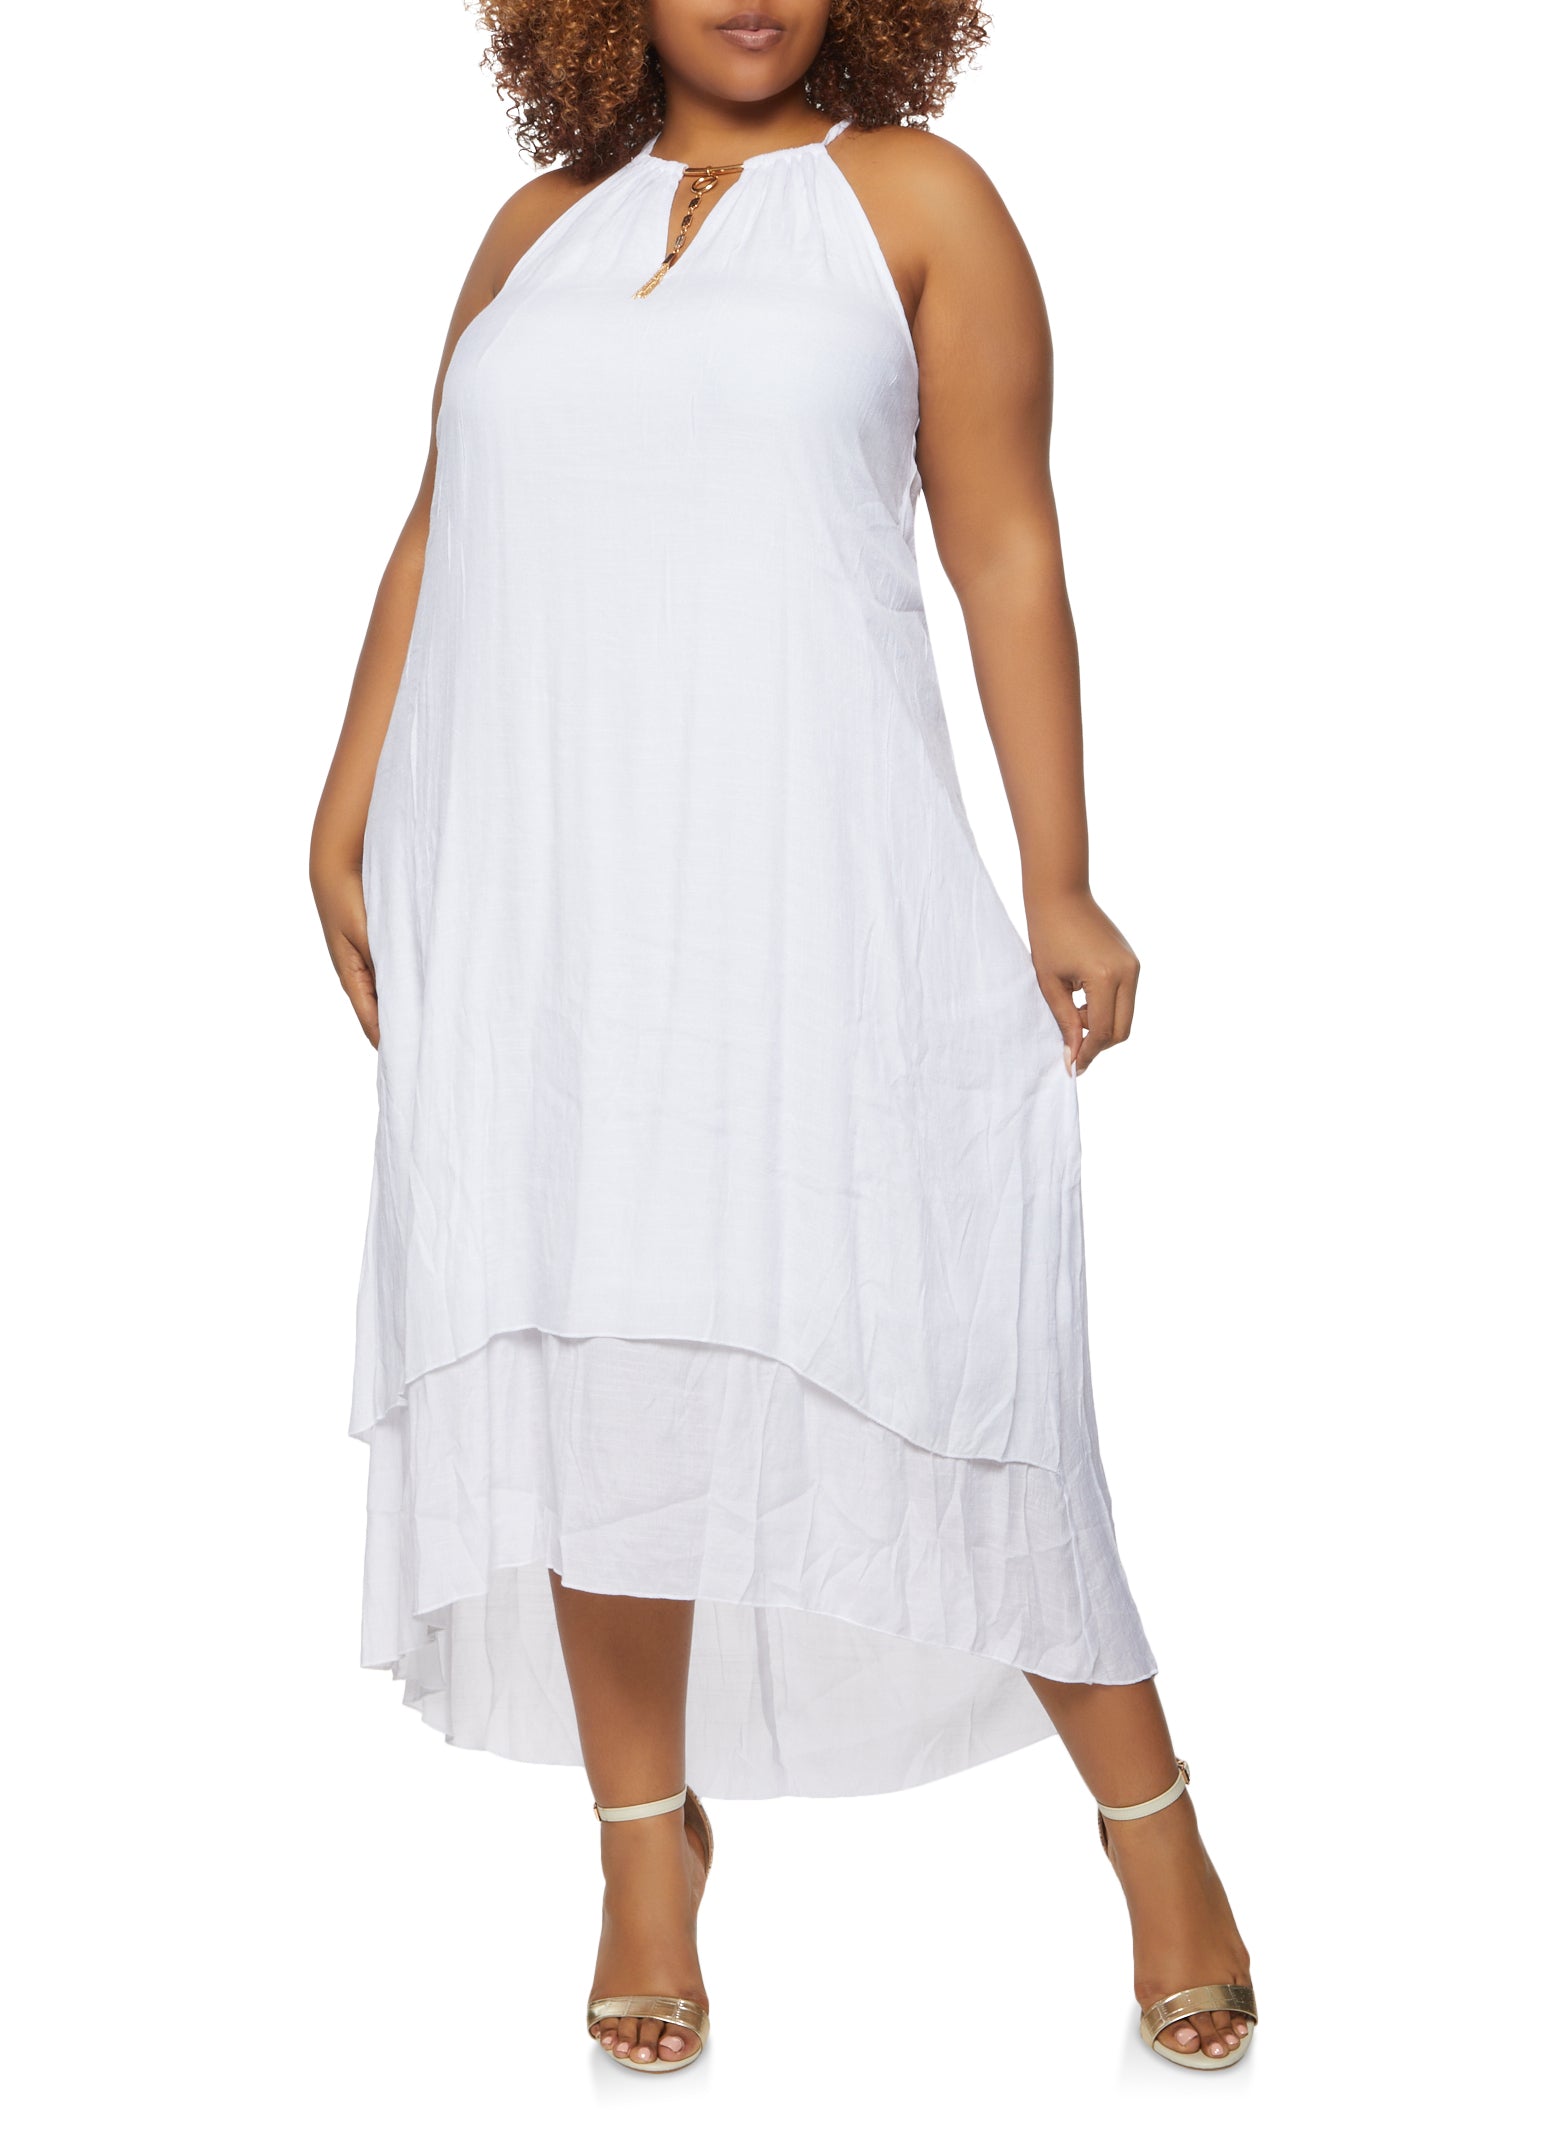 Plus Size High Low Dresses | Everyday ...